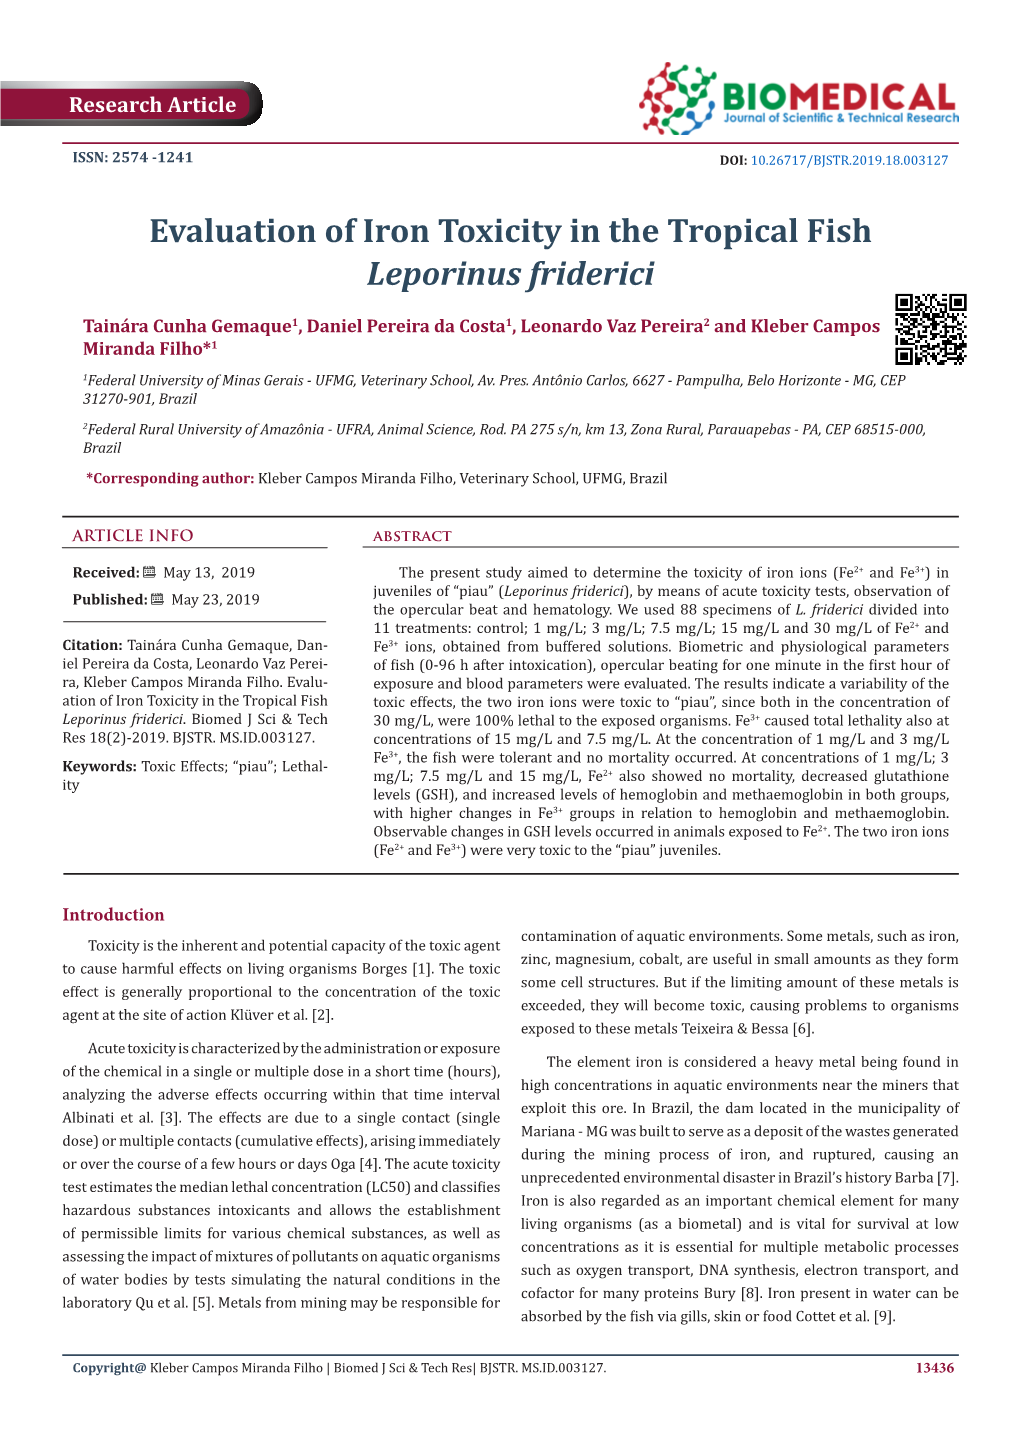 Evaluation of Iron Toxicity in the Tropical Fish Leporinus Friderici